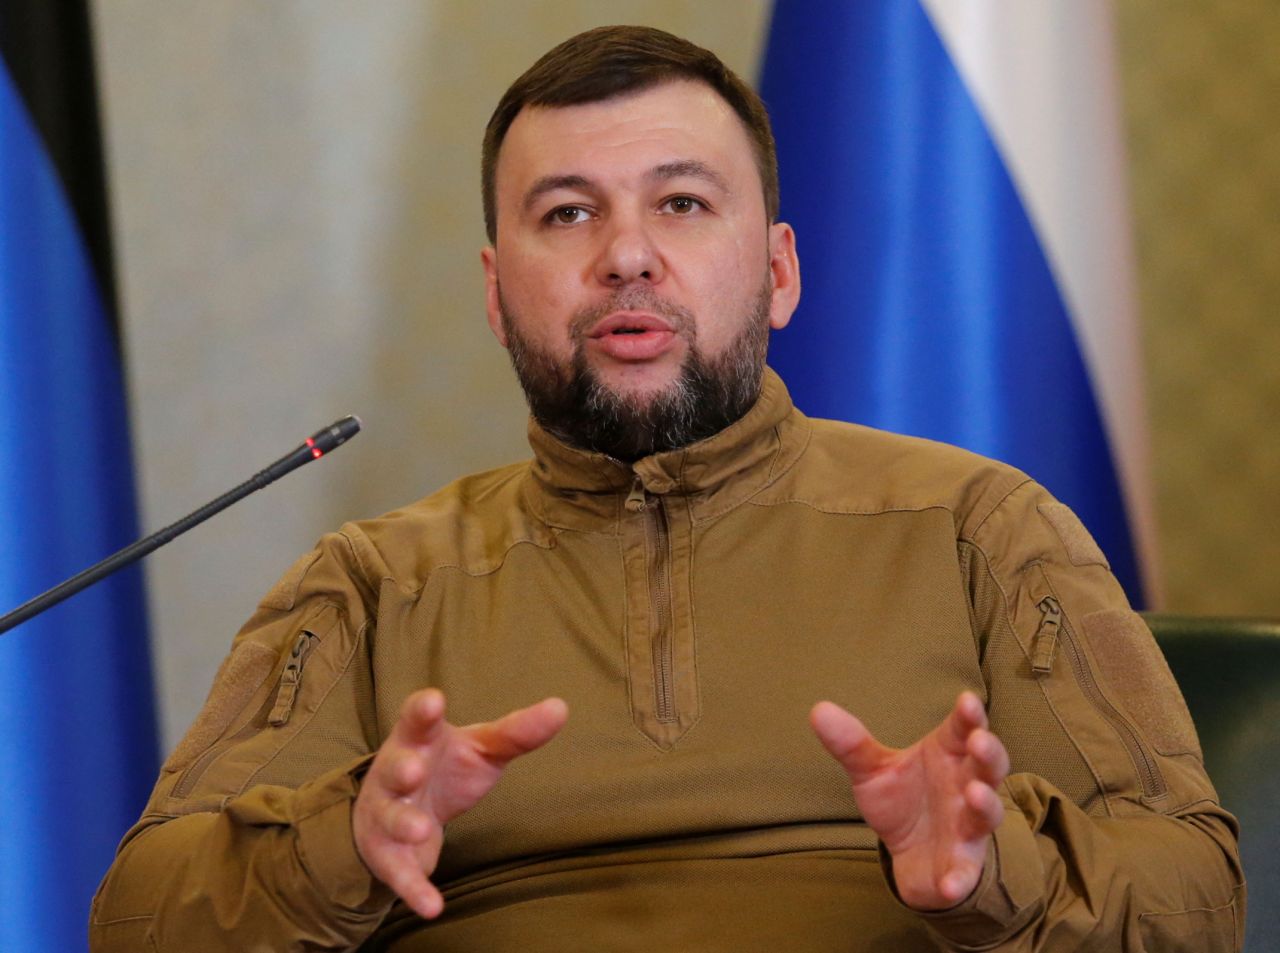 Head of the separatist self-proclaimed Donetsk People's Republic Denis Pushilin attends a news conference in Donetsk, Ukraine, on February 23.